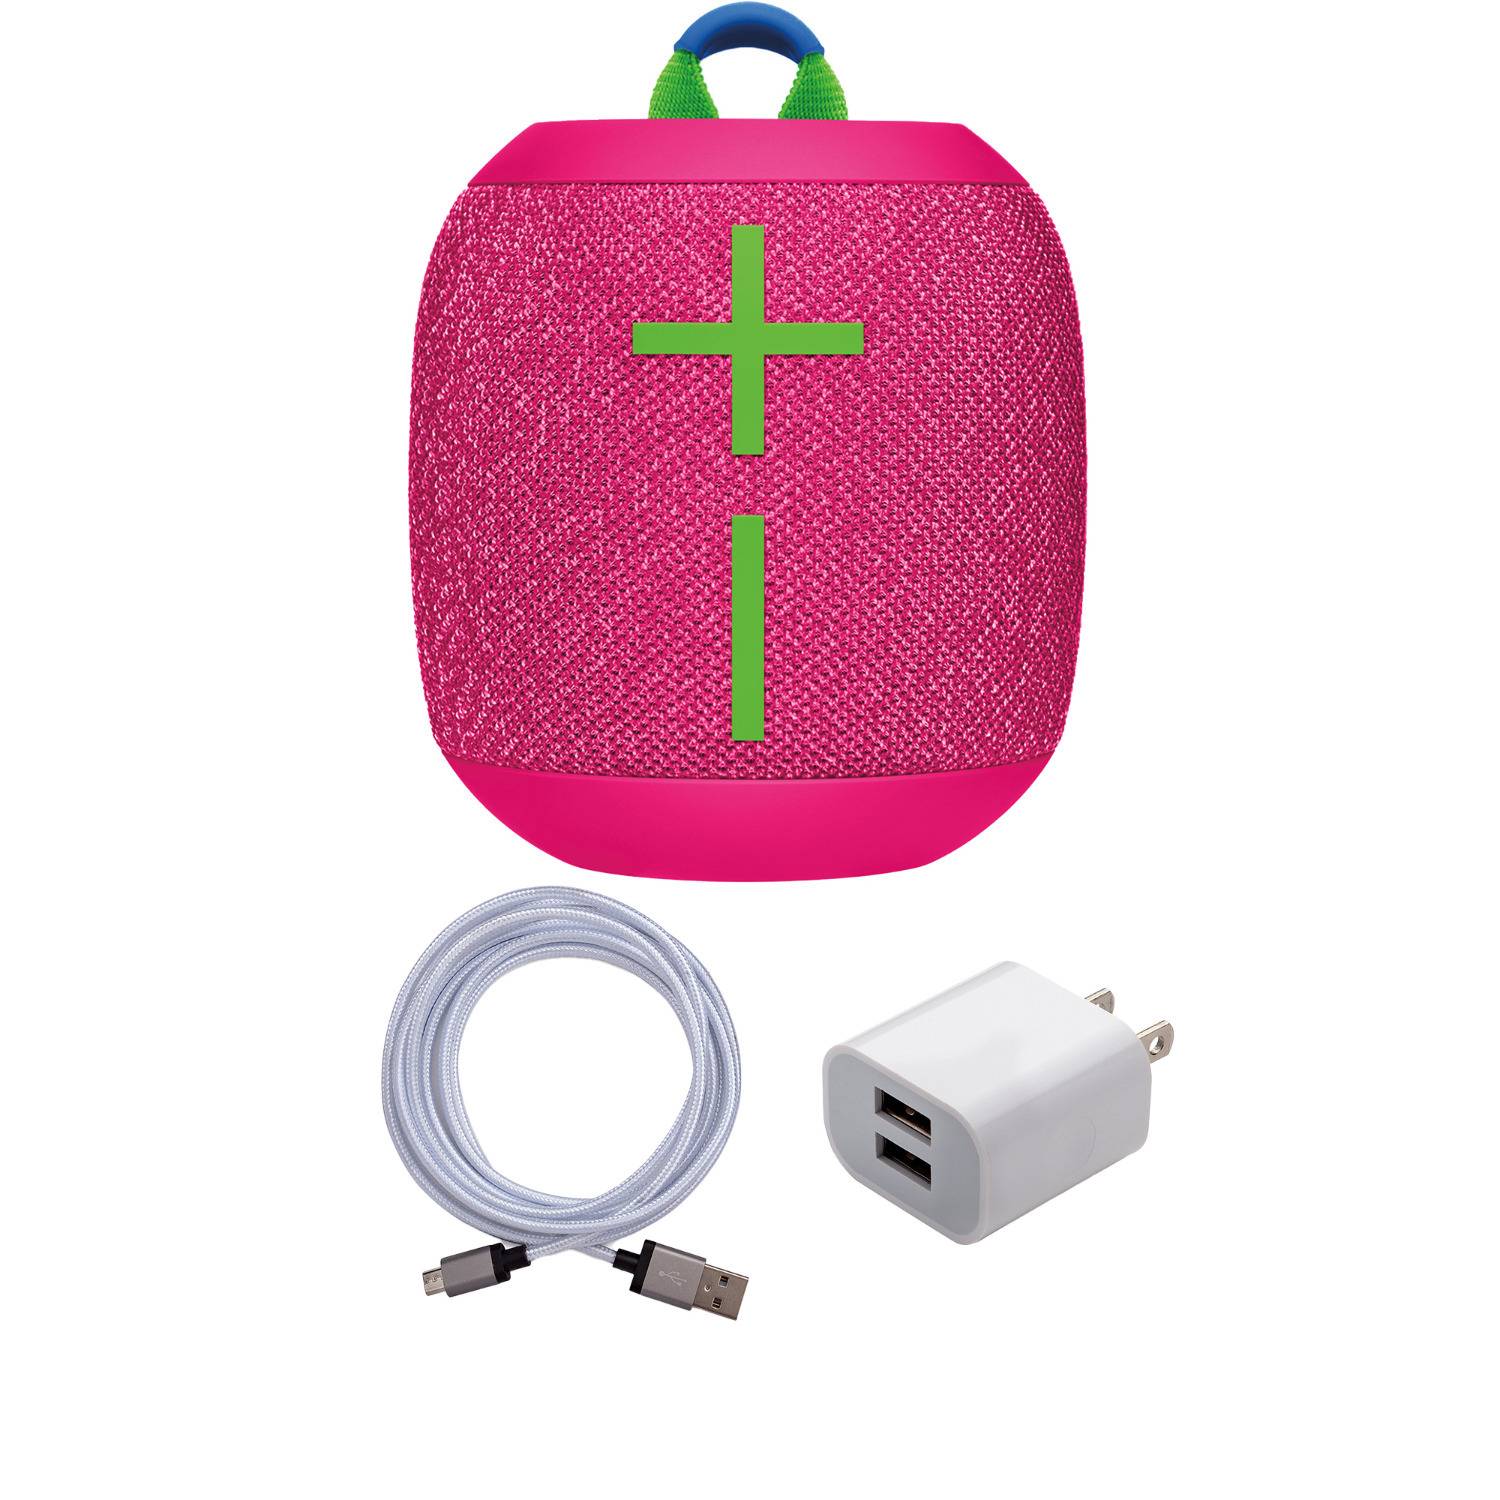 Ultimate Ears Wonderboom 3 Bluetooth Speaker (Hyper Pink) with USB Connector and Wall Charger